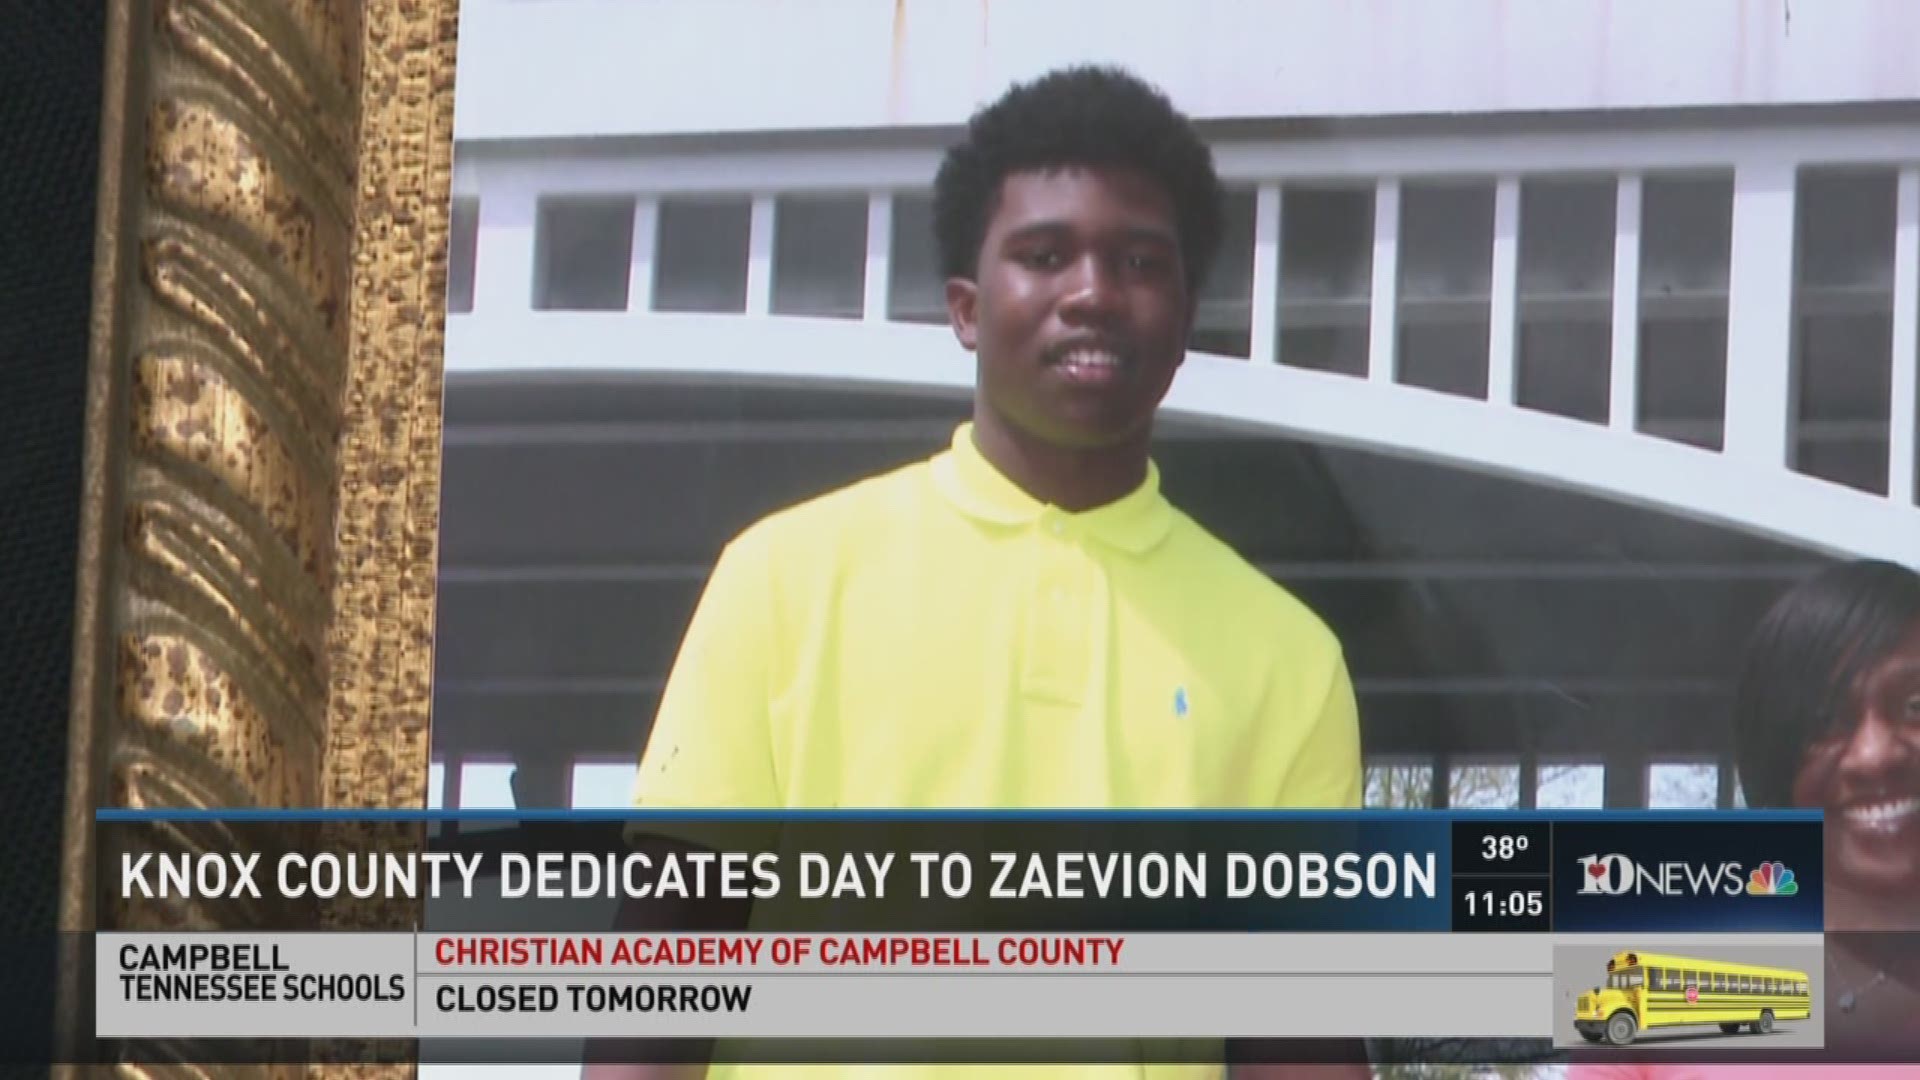 Just more than a month after Zaevion Dobson gained national attention for sacrificing himself to save two girls from gunshots, the Knox County Commission is dedicating a day to honor the 15-year-old. 